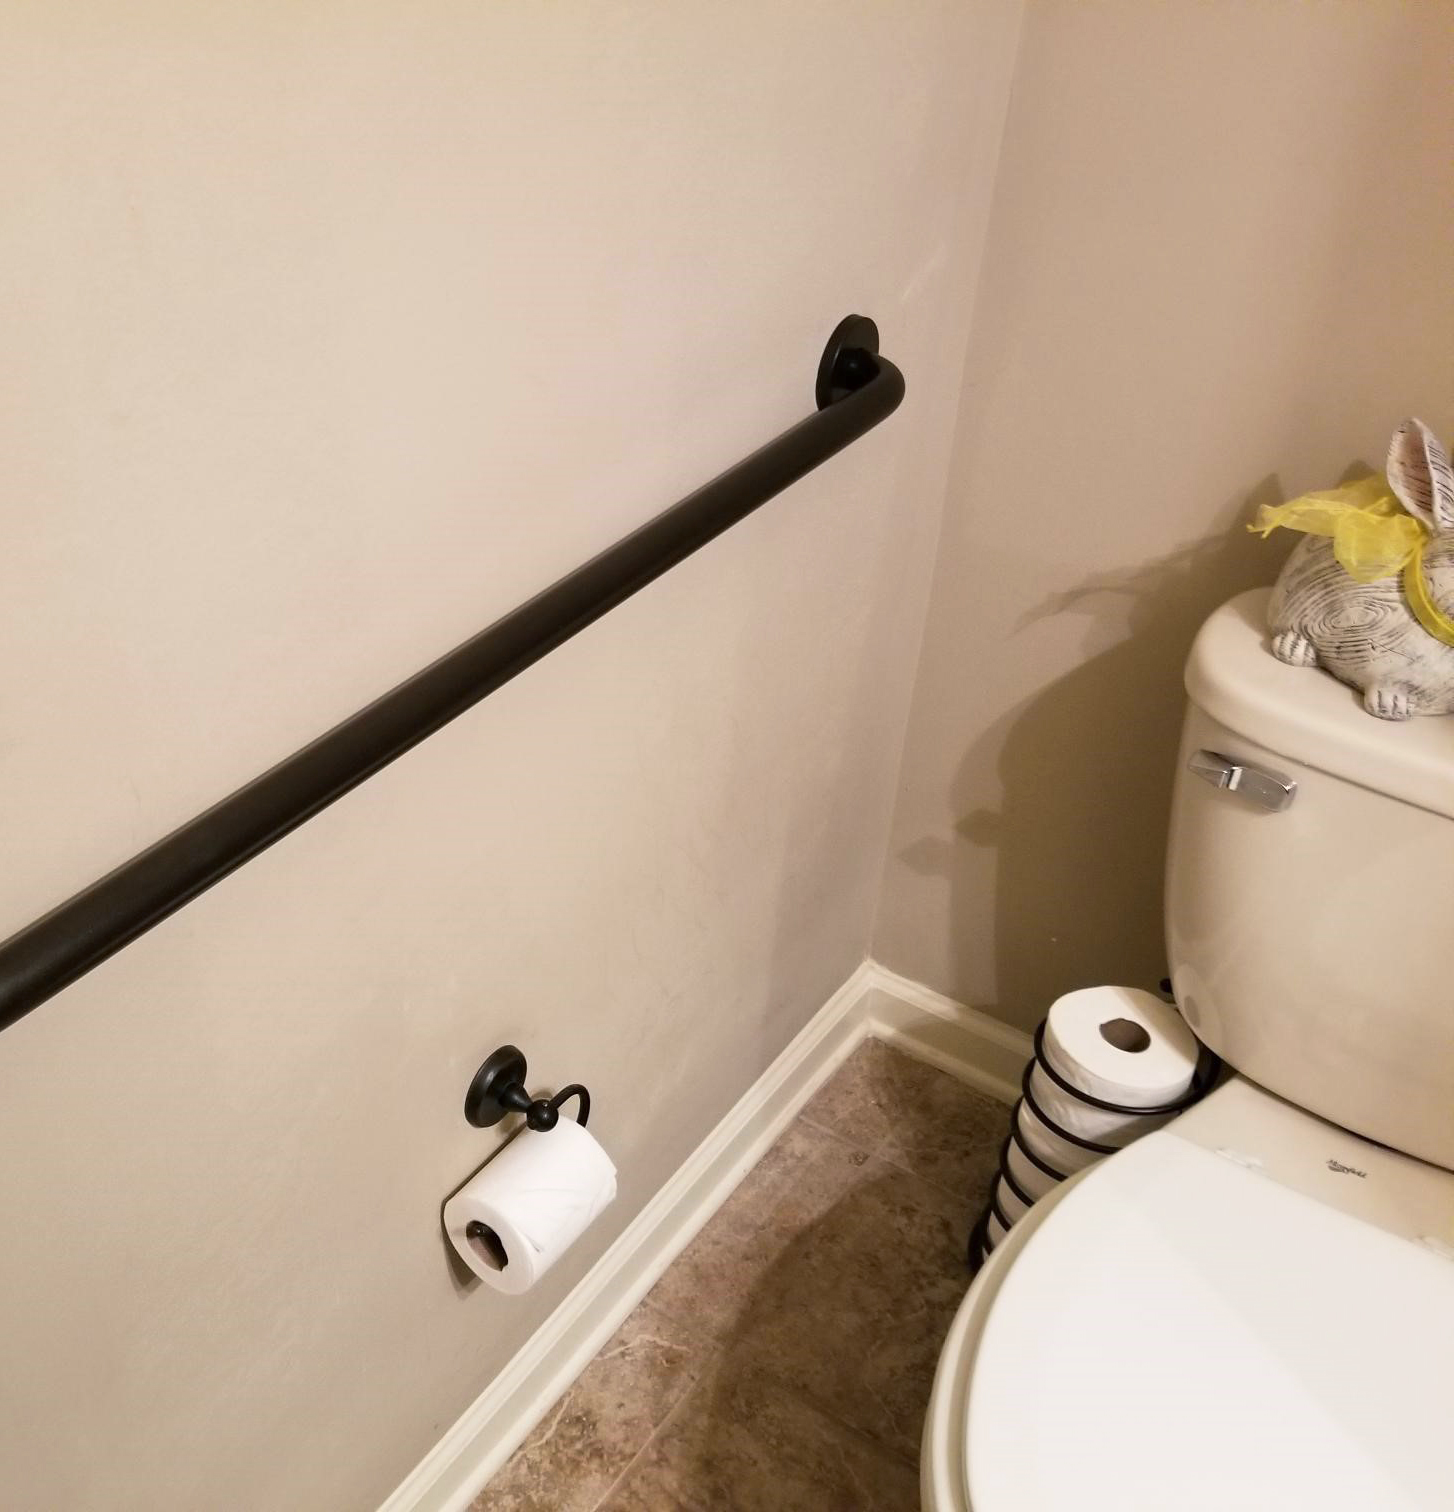 The Guidelines for Proper Grab Bar Installation